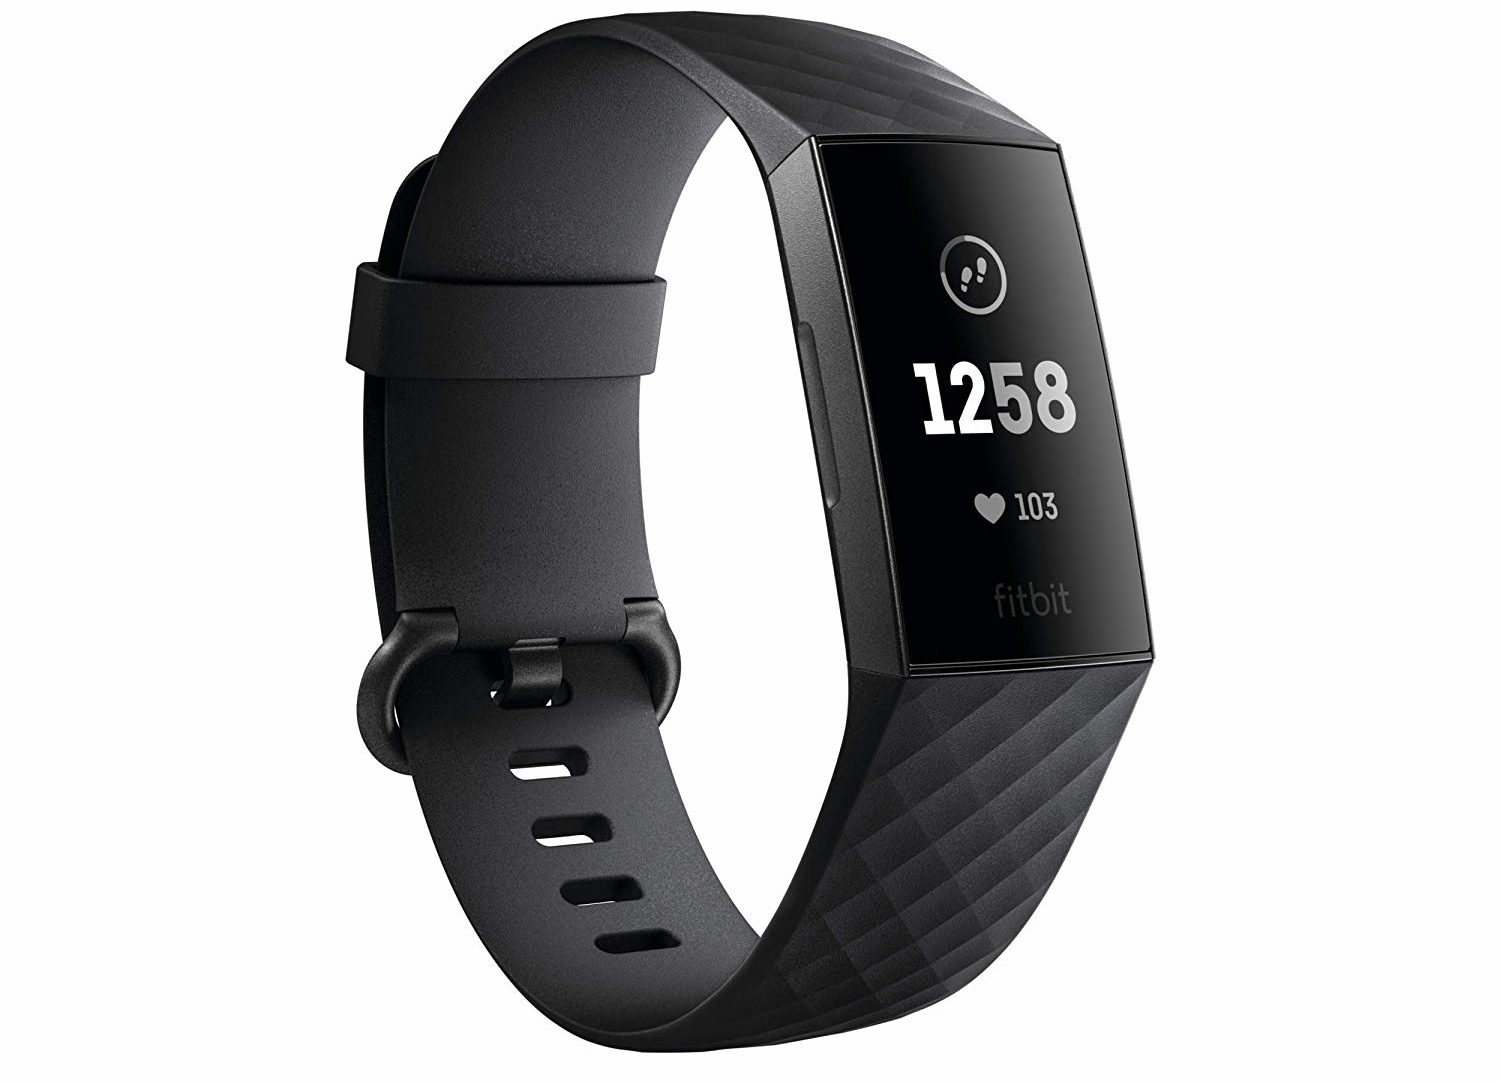 Best Gifts For Him 2023: FitBit Charge 3 2023